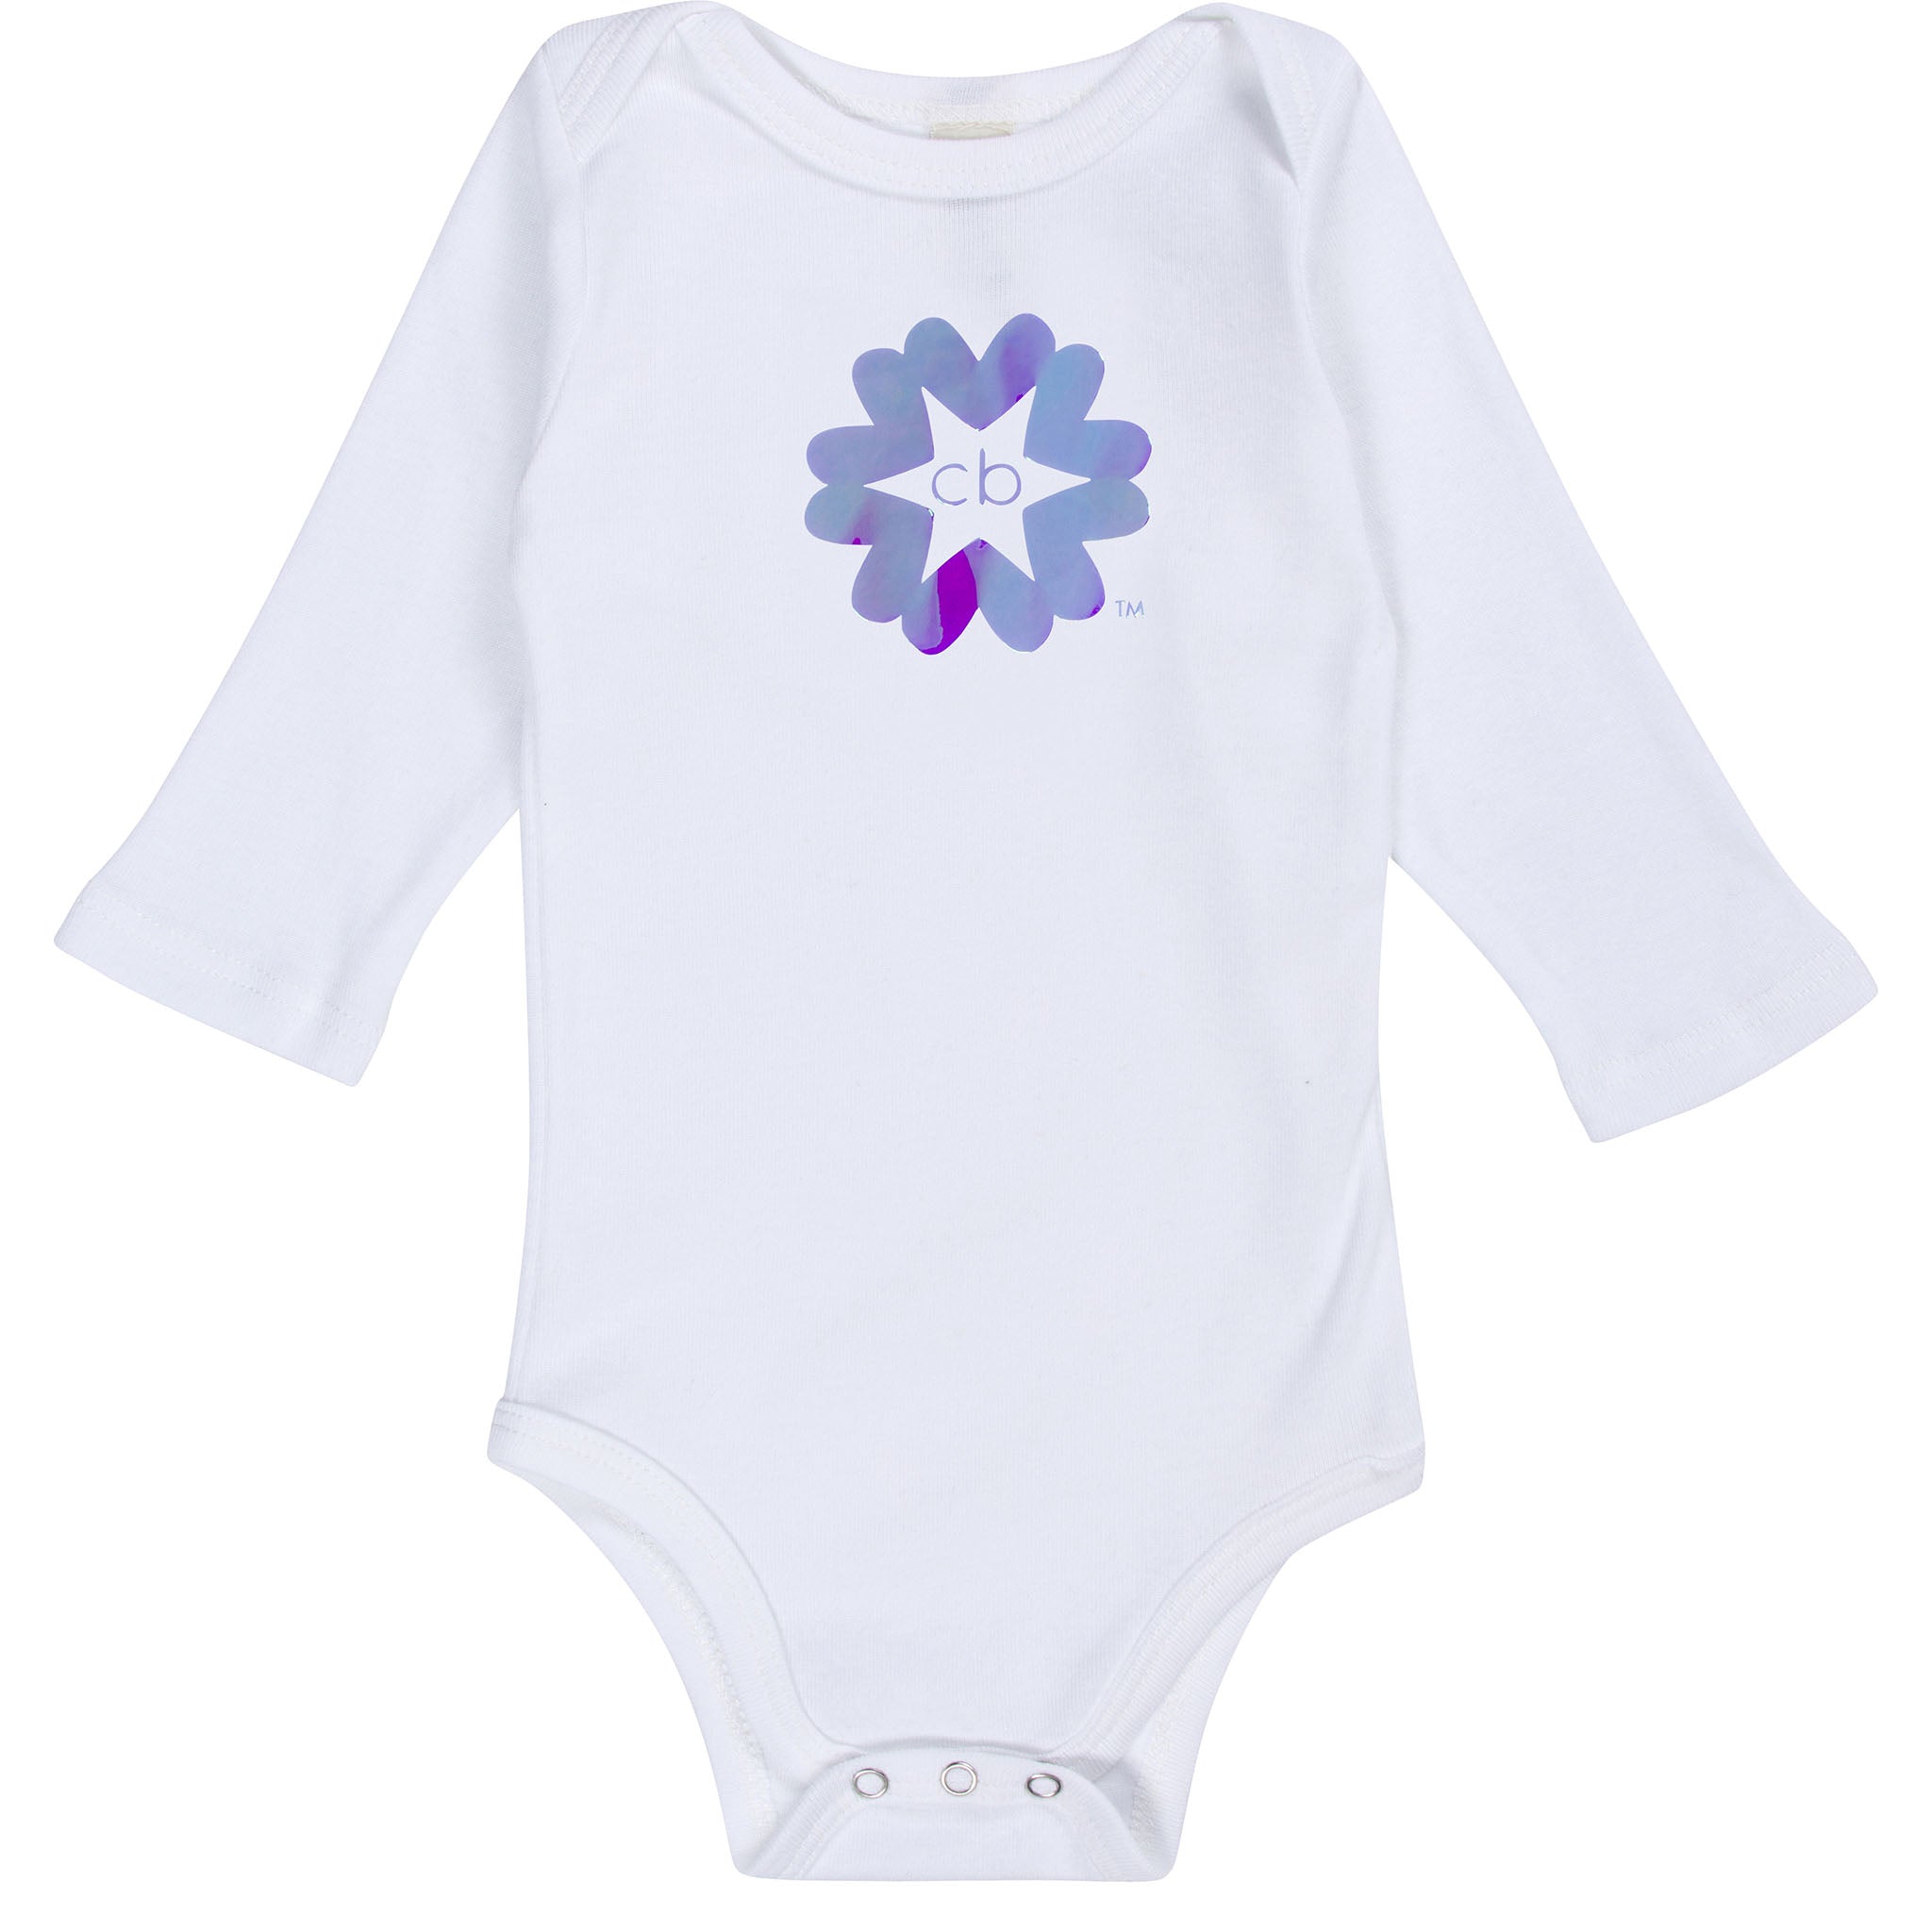 Limited edition organic cotton white onesie with a blue holographic clever baby signature mark. 